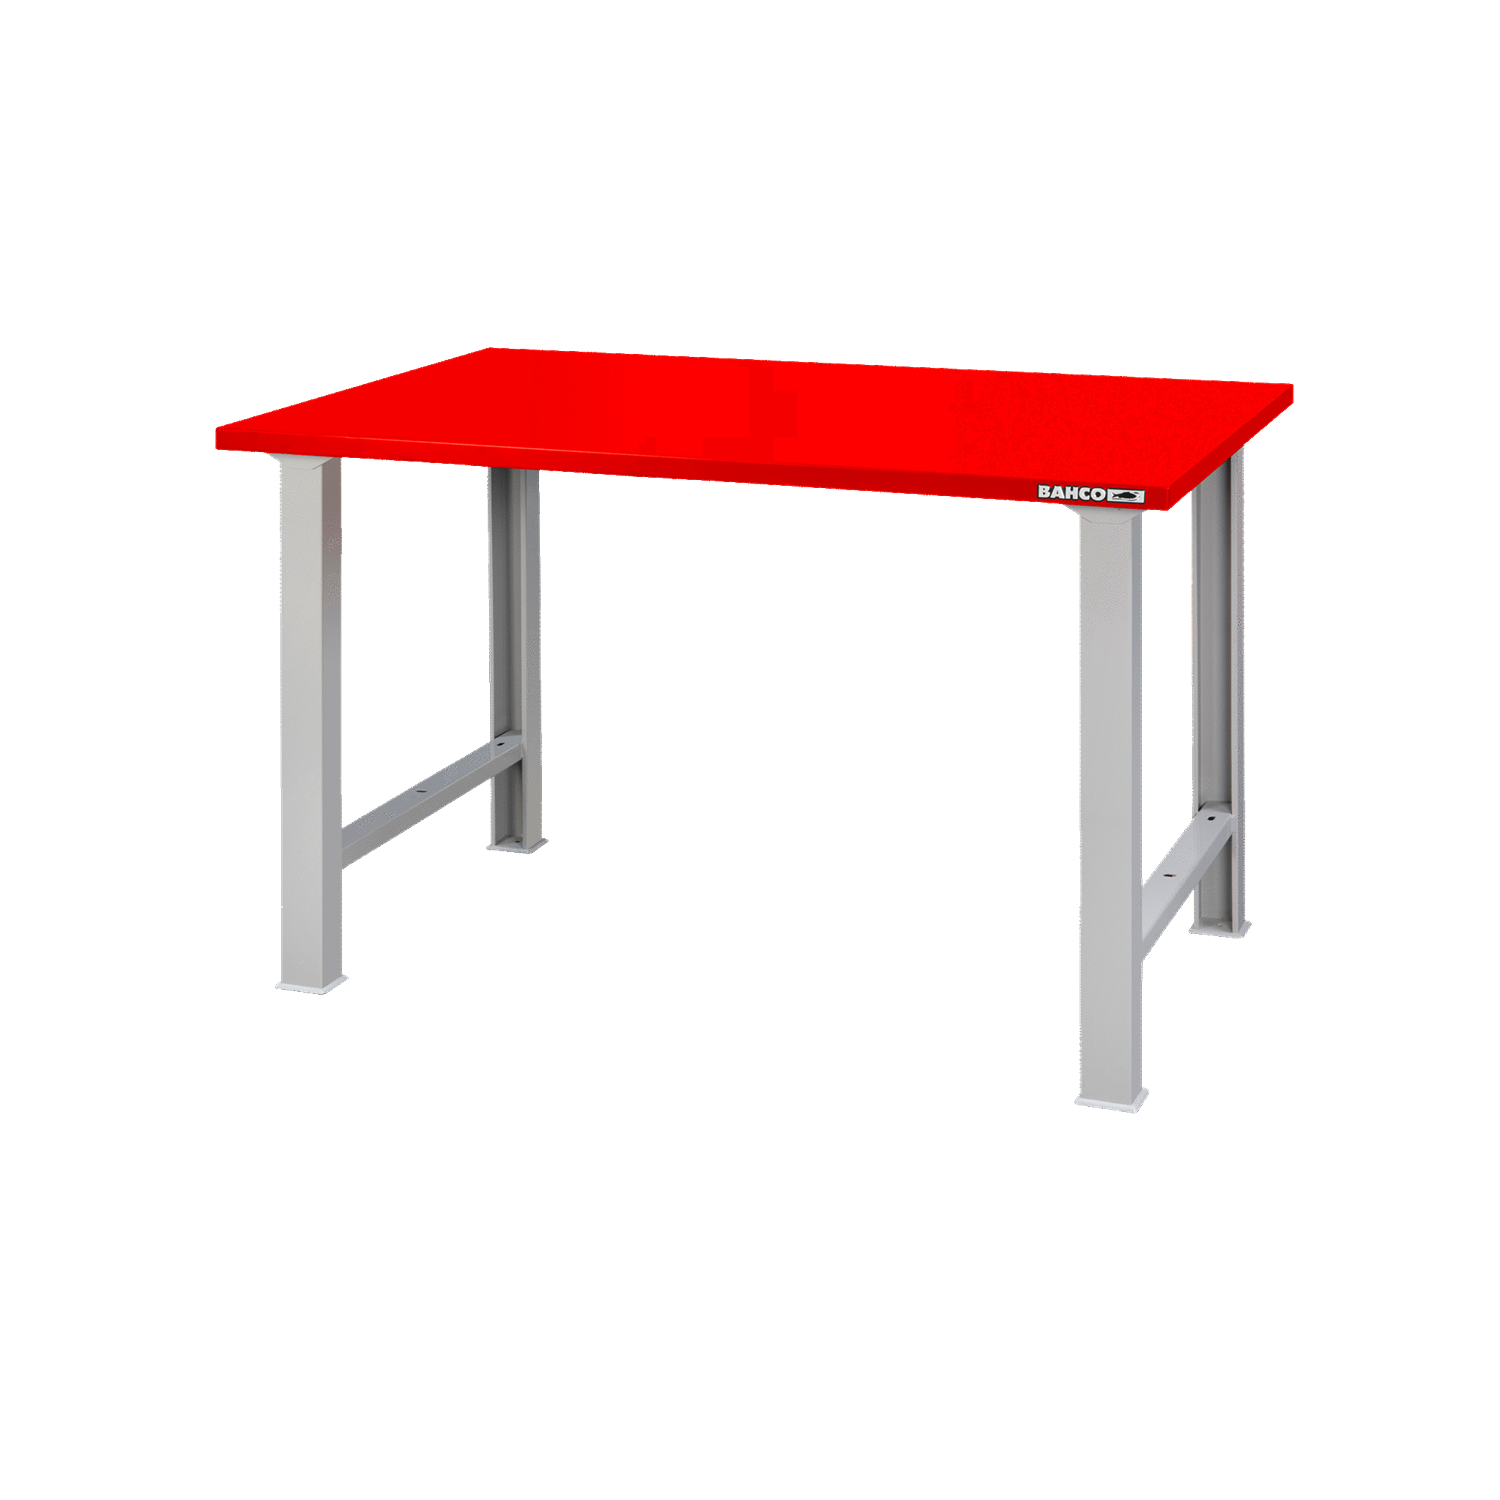 BAHCO 1495WB-TS Heavy Duty Steel Top Workbenches with 4-Leg - Premium Workbench from BAHCO - Shop now at Yew Aik.